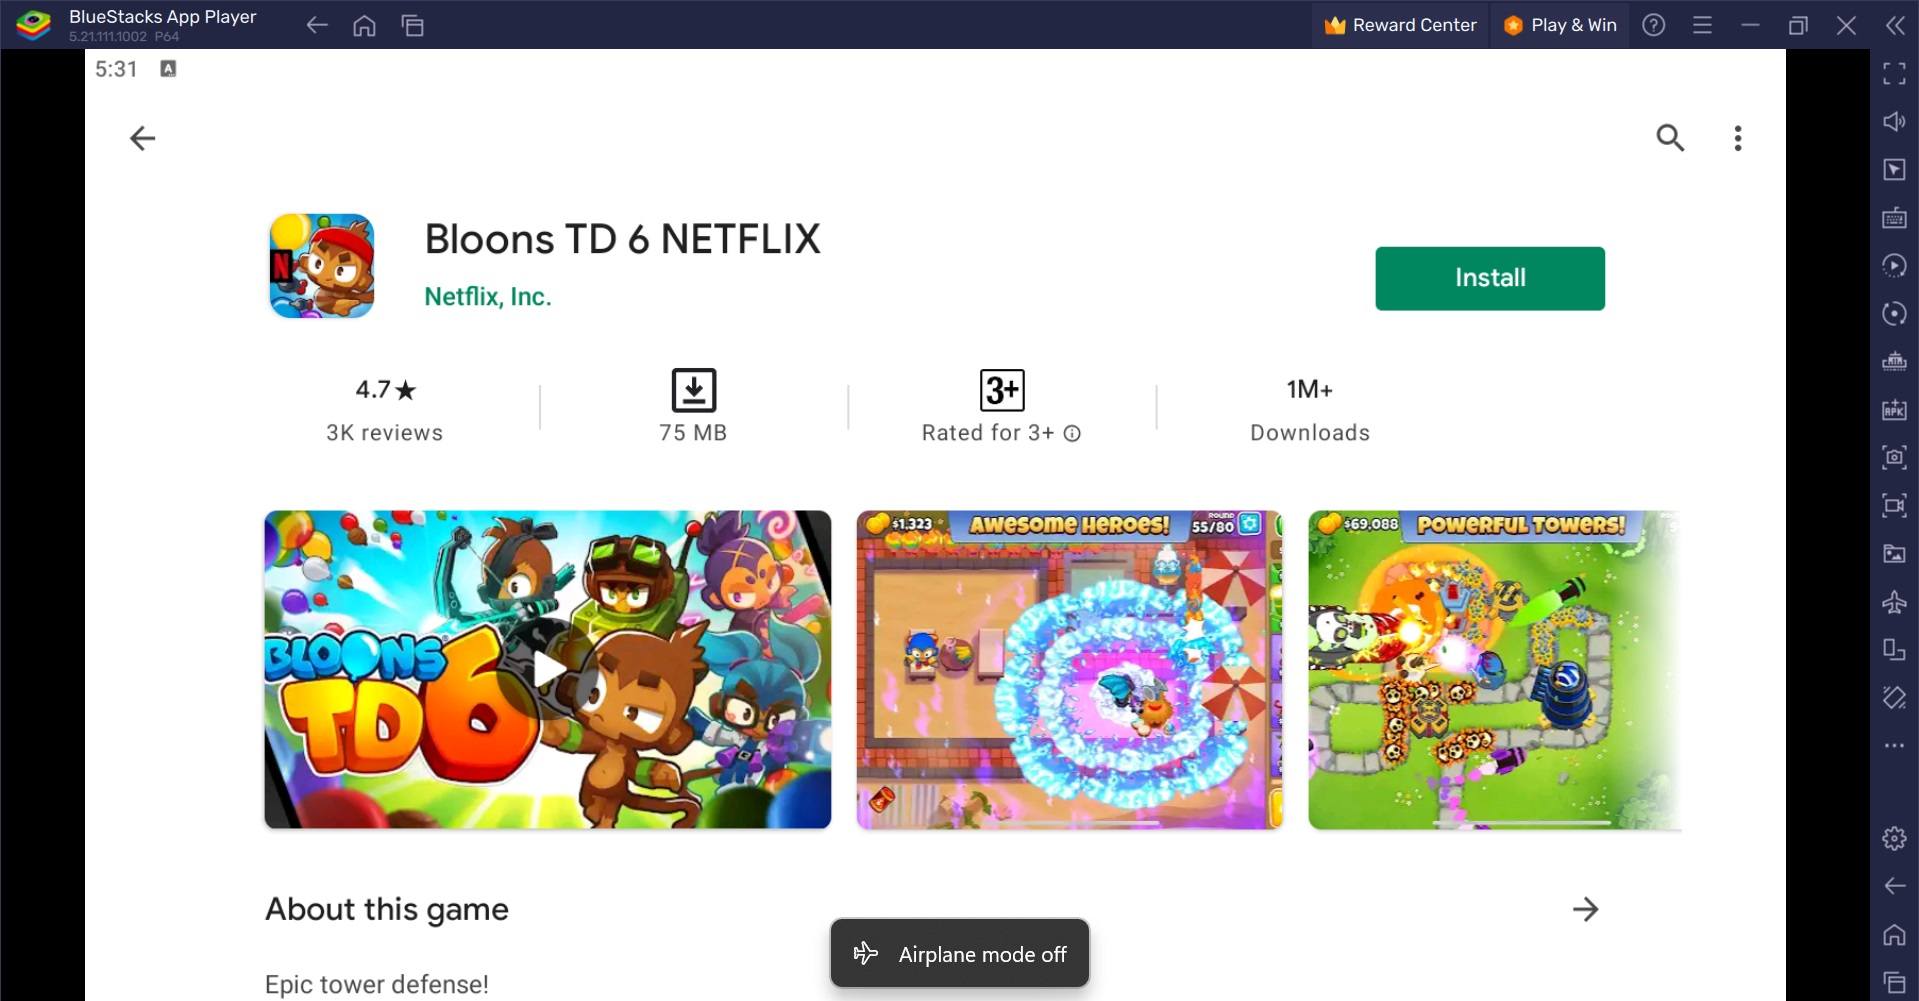 How to Play Bloons TD 6 NETFLIX on PC with BlueStacks